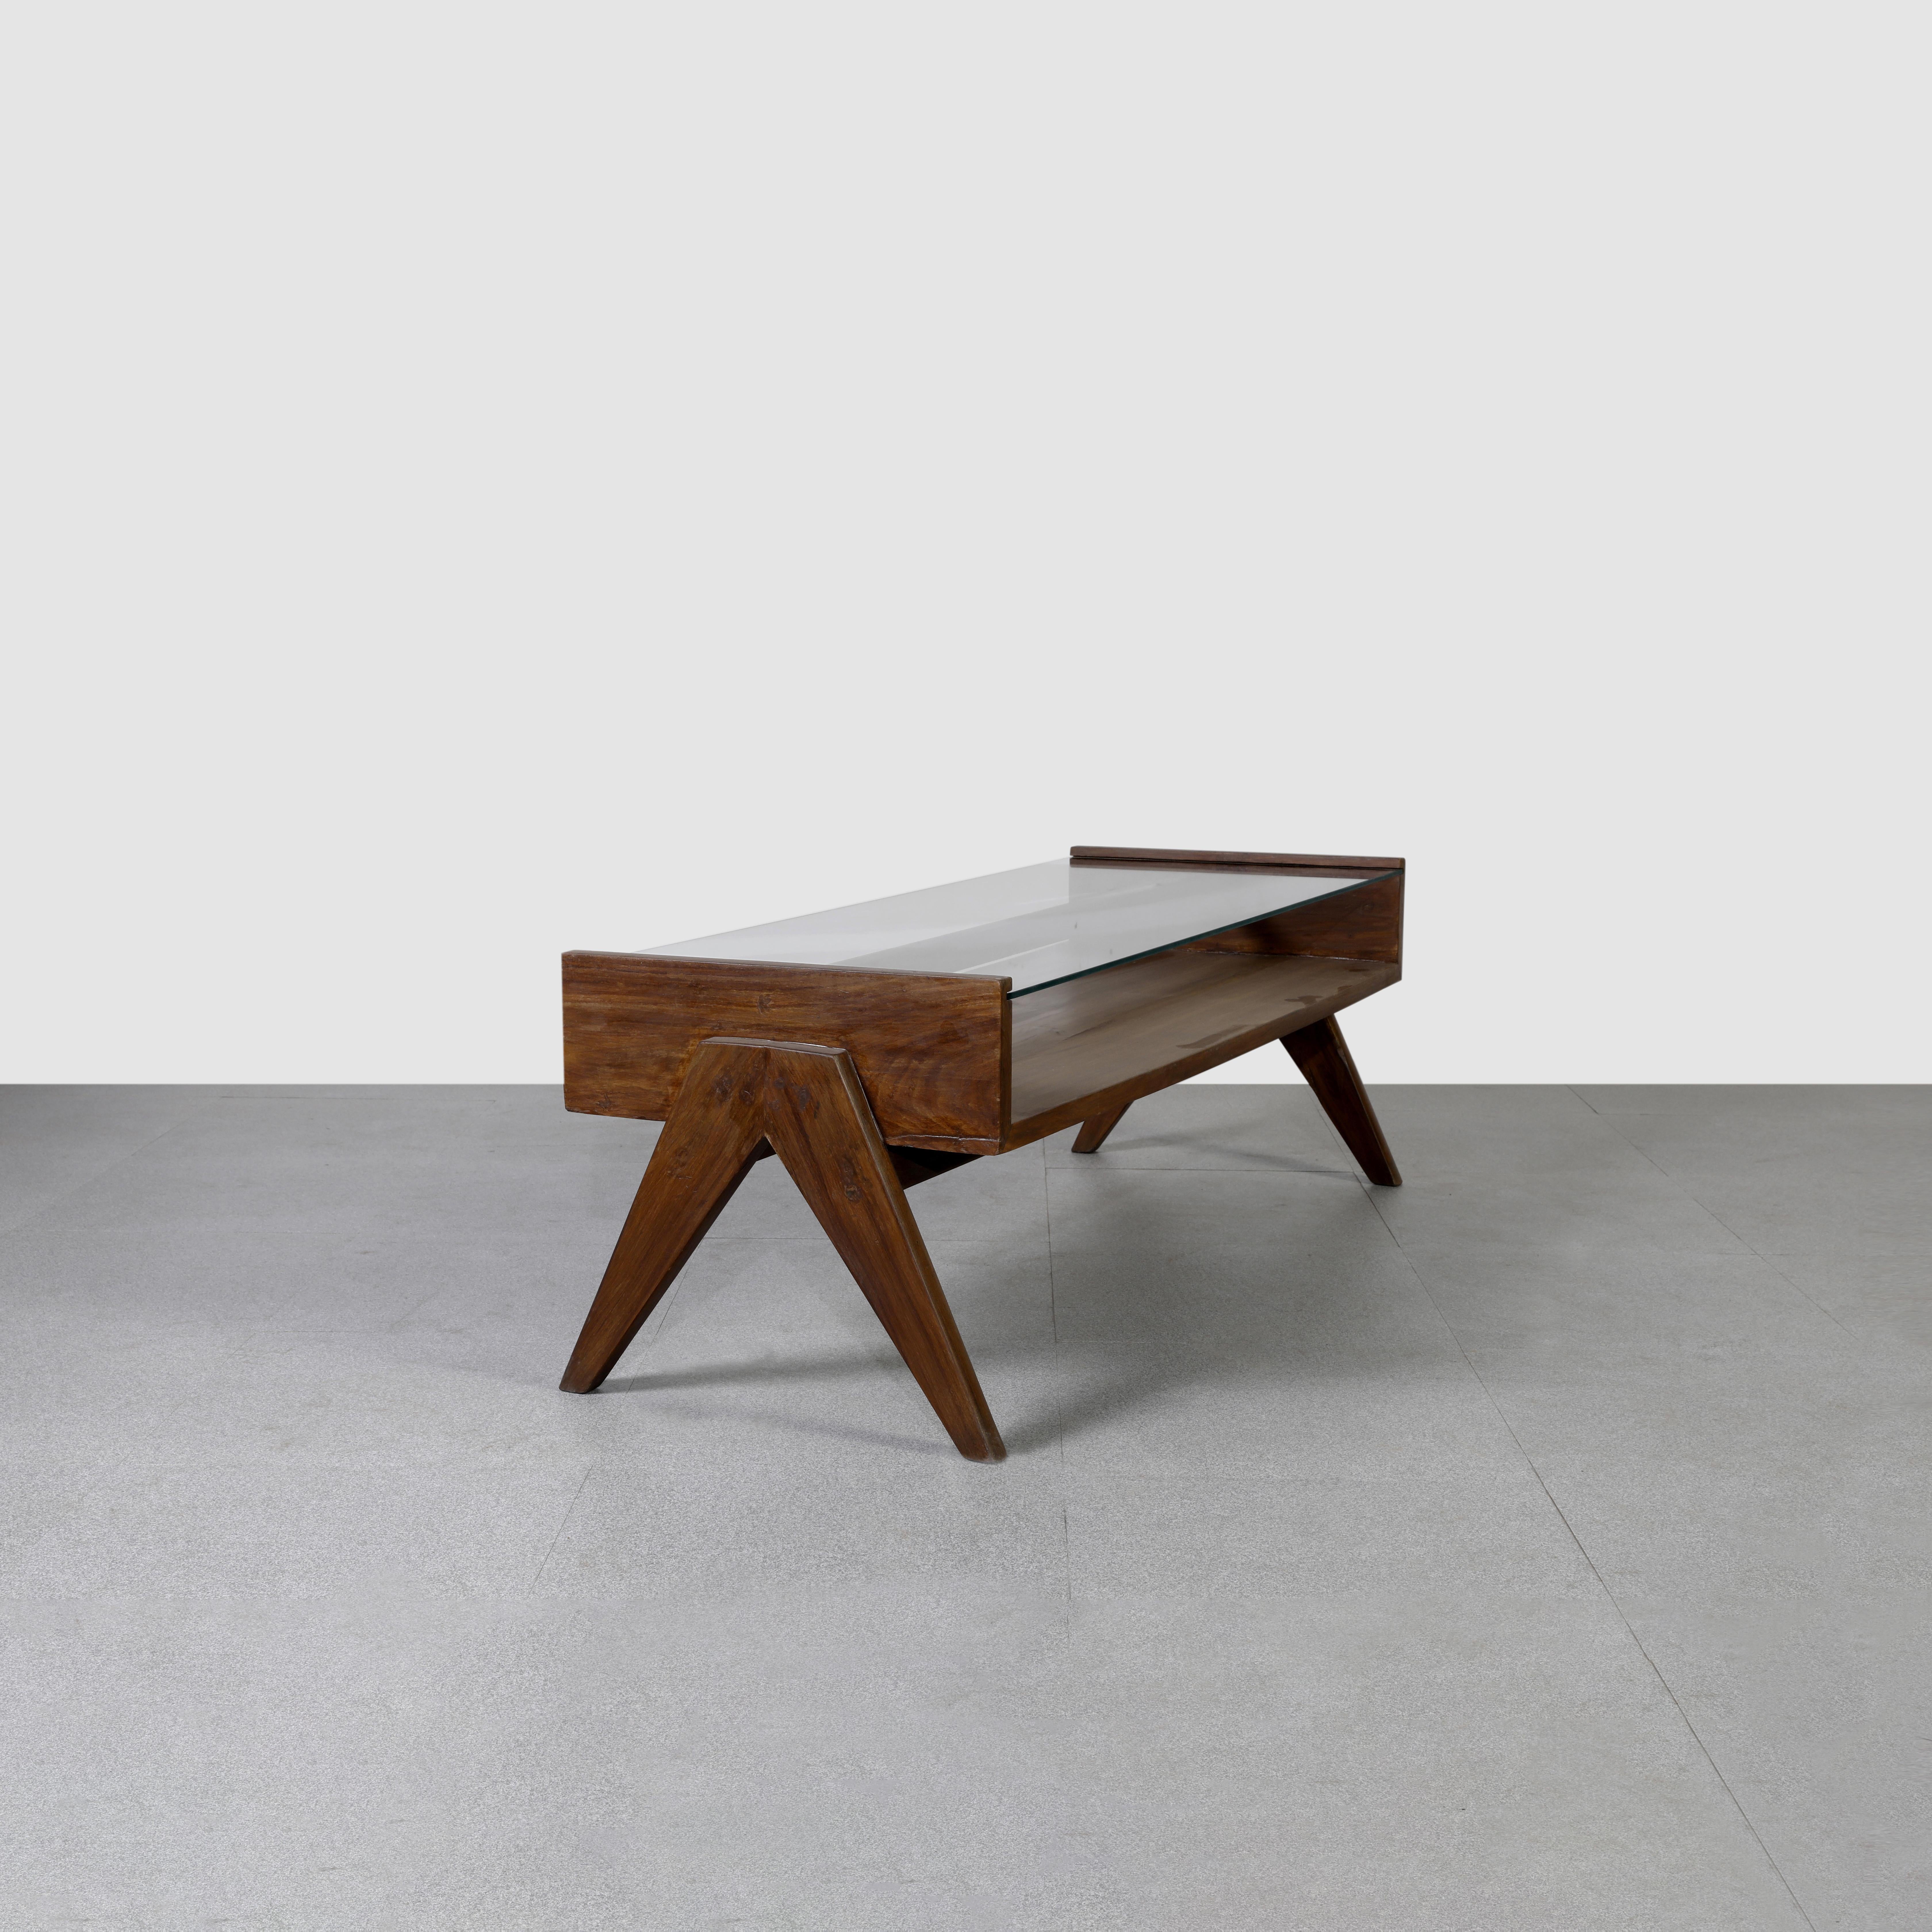 This coffee table is not only a fantastic piece, it’s a design icon. It is raw in its simplicity, embodying an expressing the pure ideas of Jeanneret. There is something deeply touching about this design and at the same time it’s very sharp and